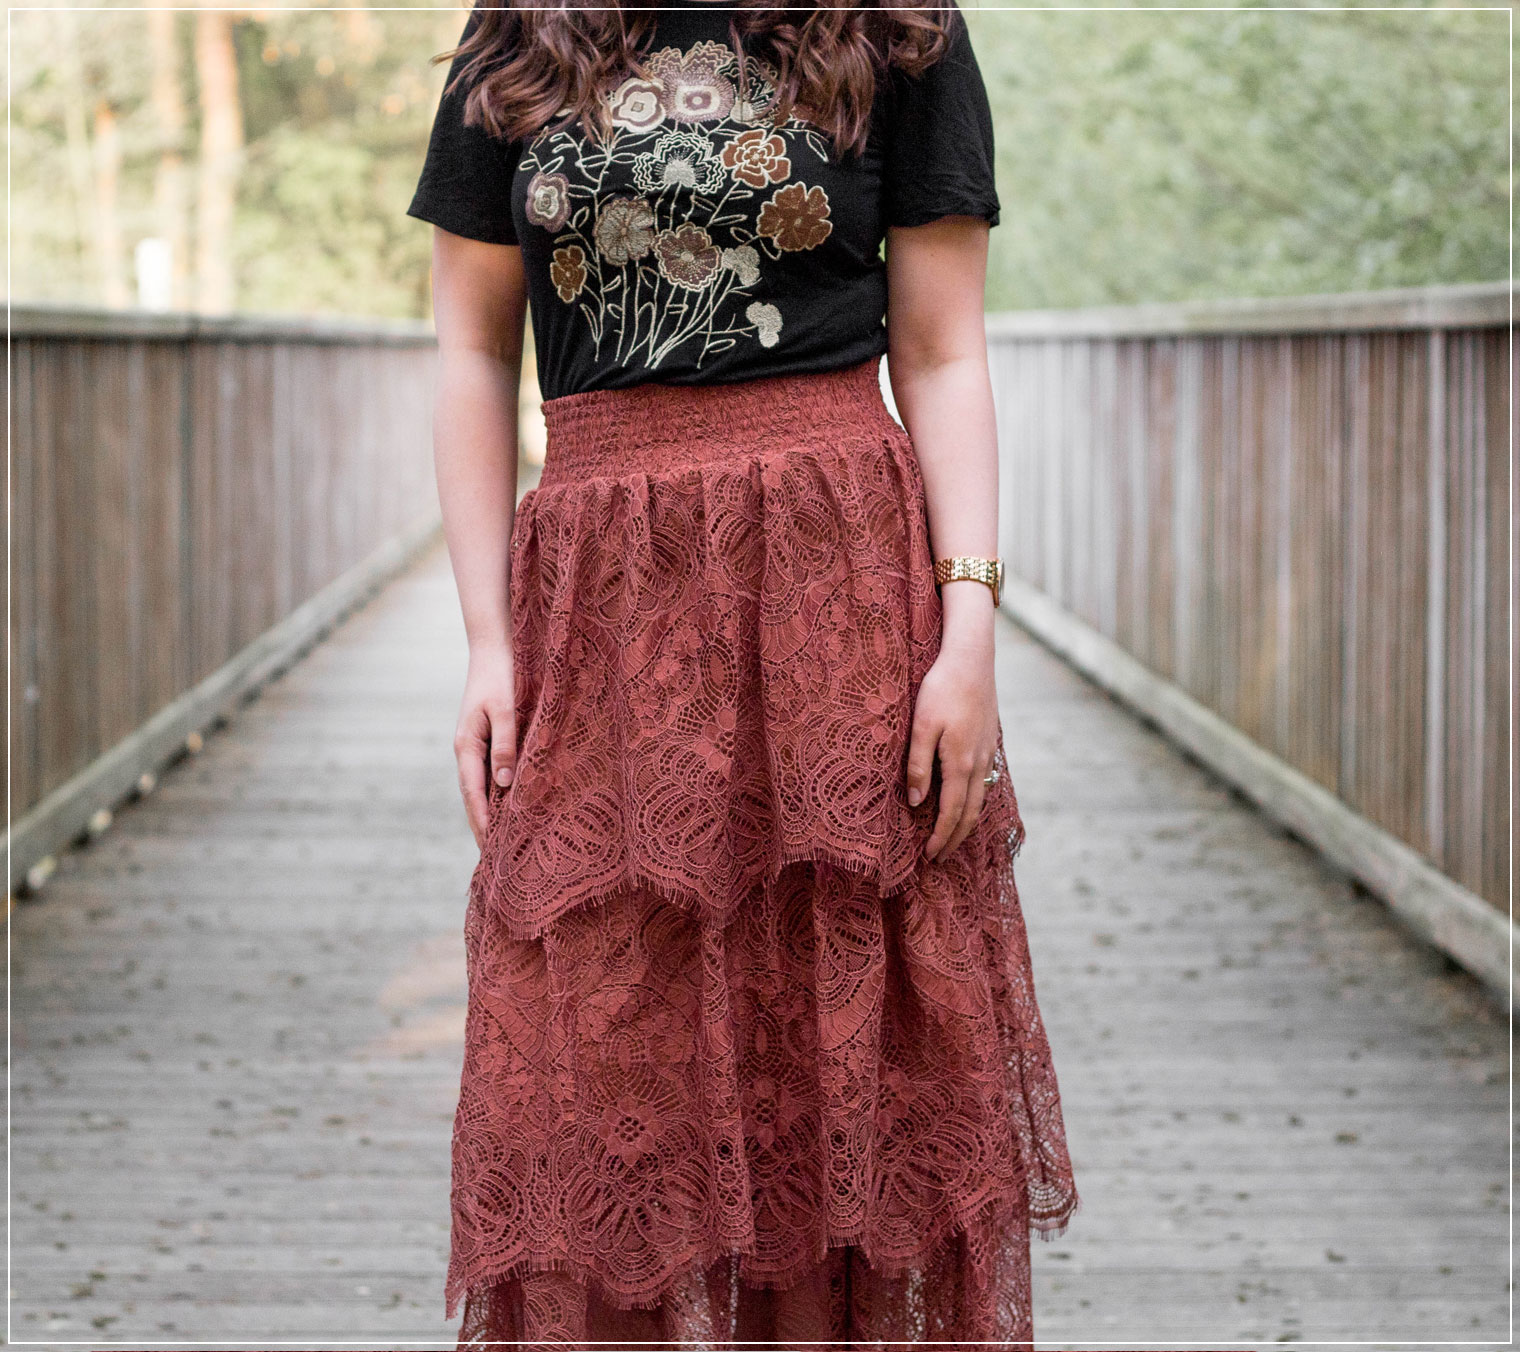 Boho-Style, Boho-Rock, Midi-Rock, Festival Look, Sommerlook, Sommeroutfit, Styleguide, Outfitinspiration, Modebloggerin, Fashionbloggerin, Modeblog, Ruhrgebiet